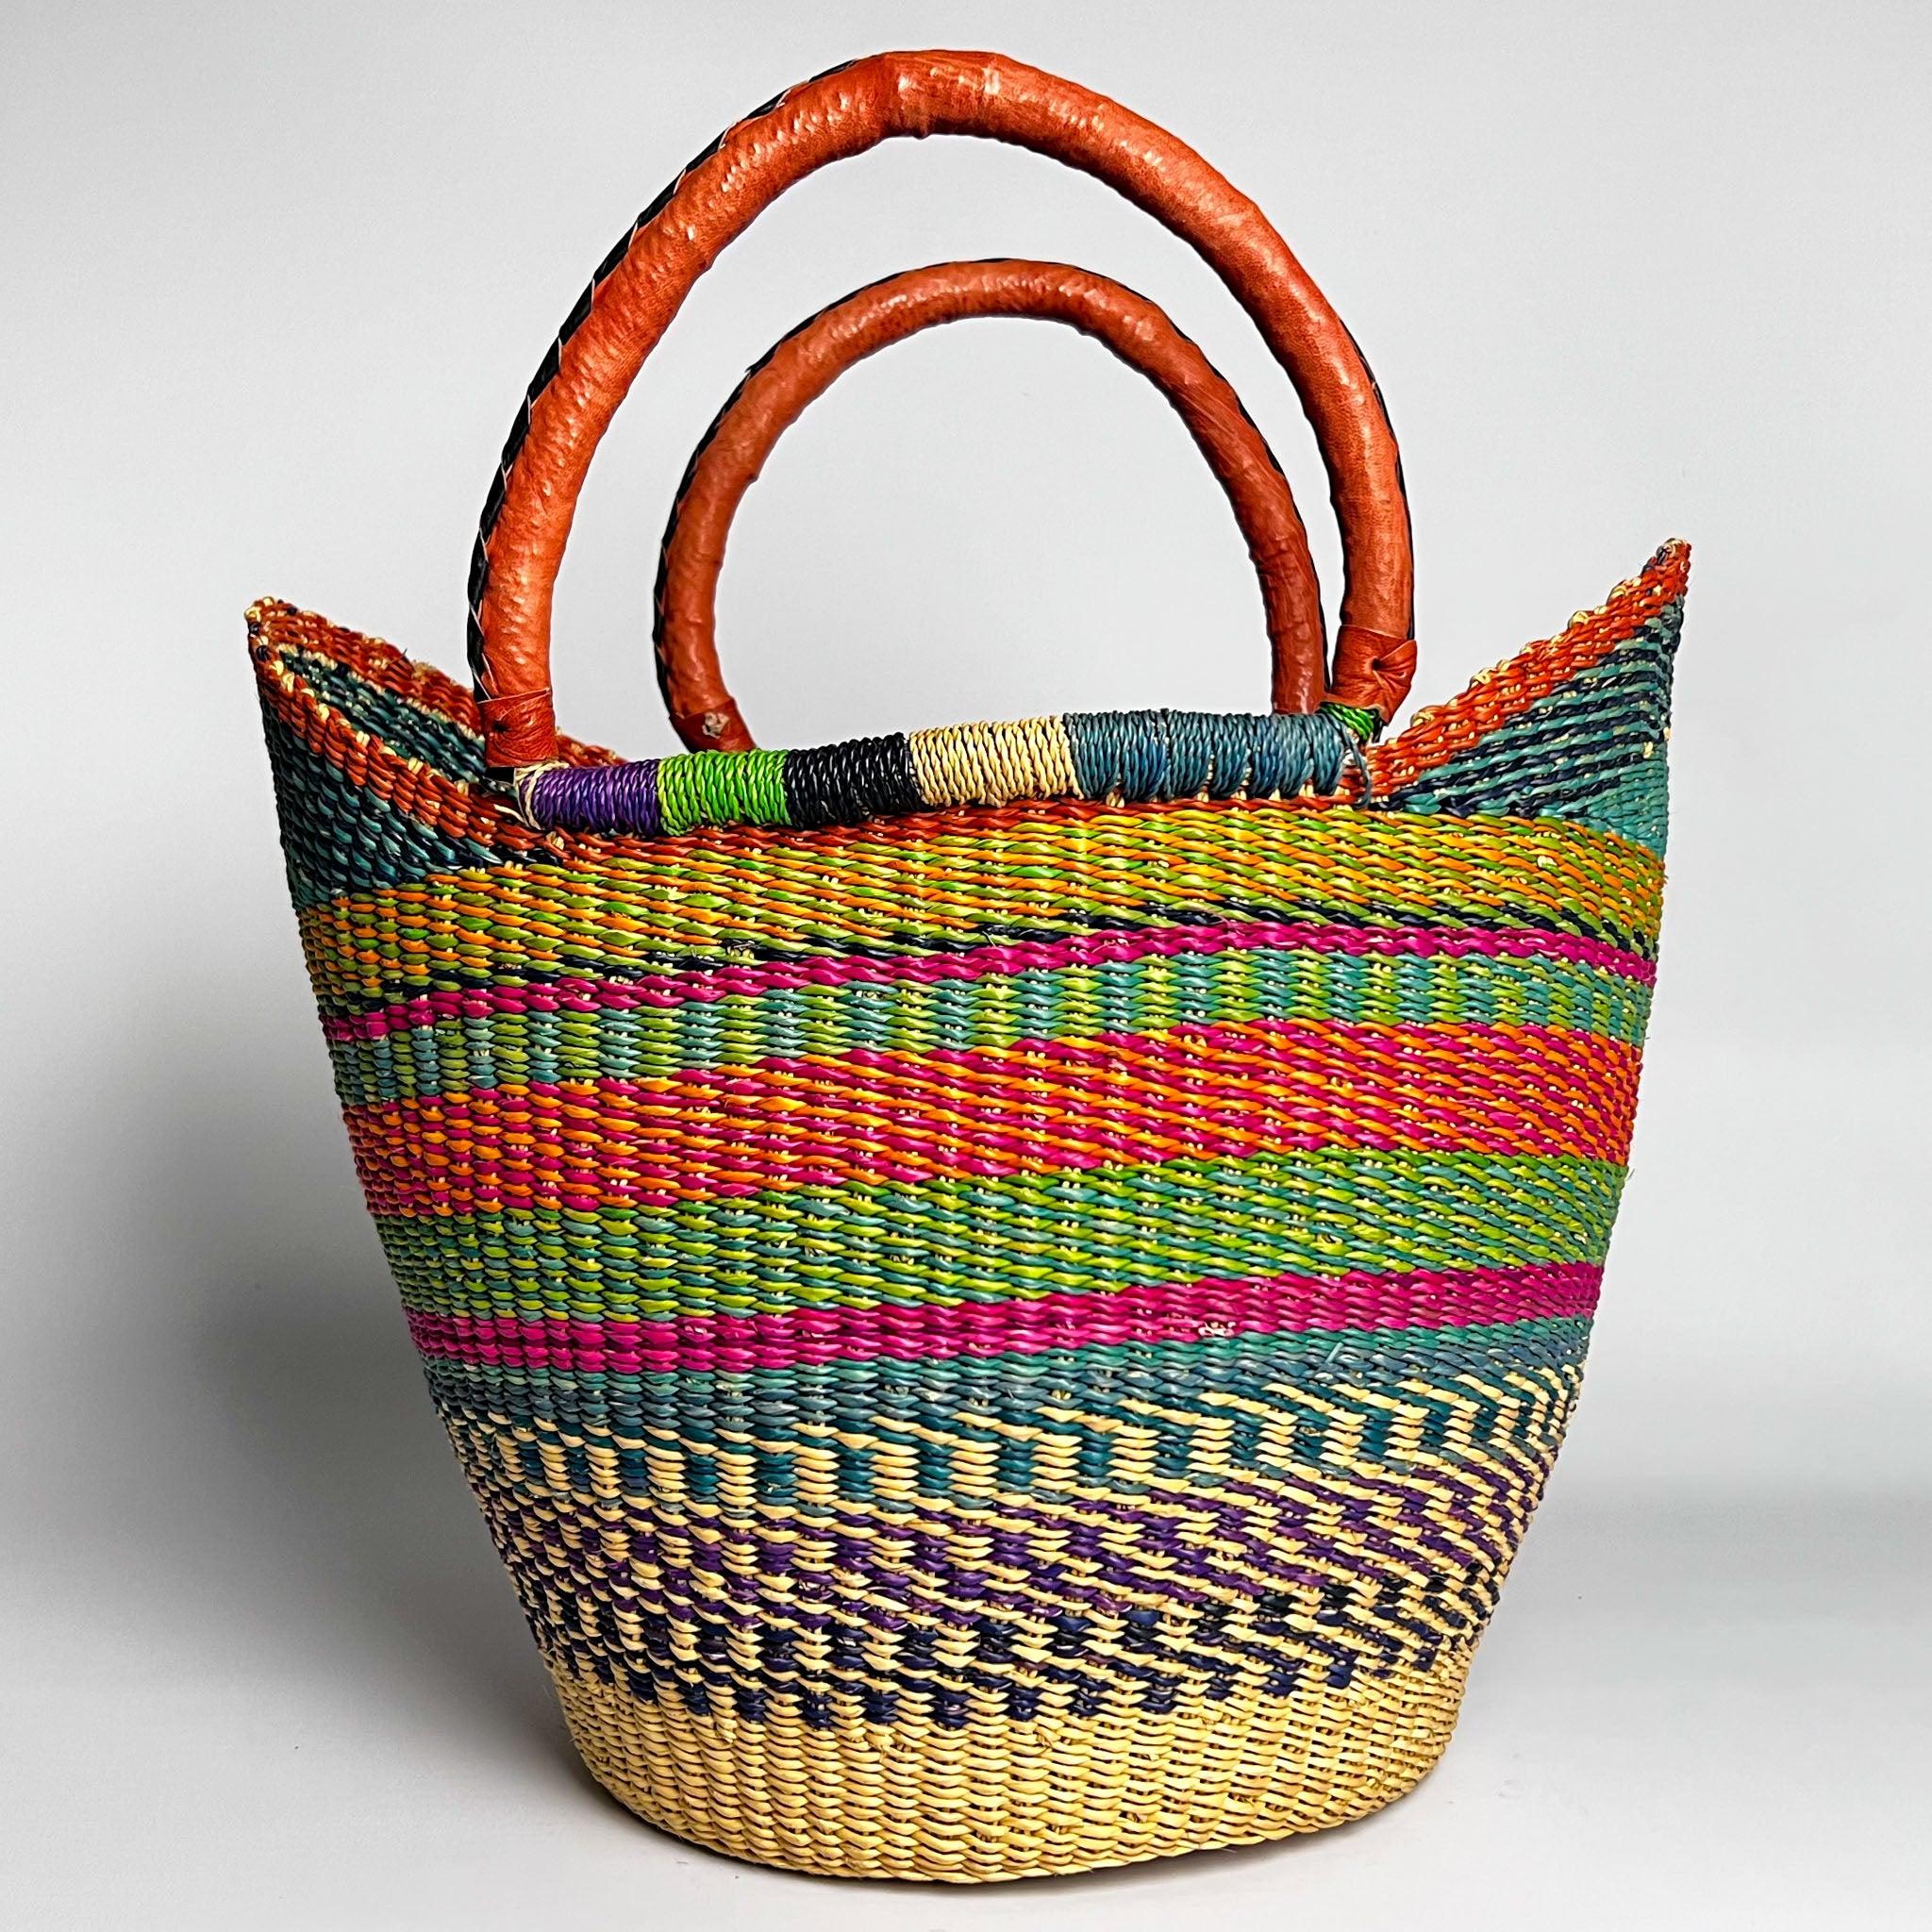 Colourful U Shape traditional Ghanian shopper basket in greens and red design and with tan and black leather handles.